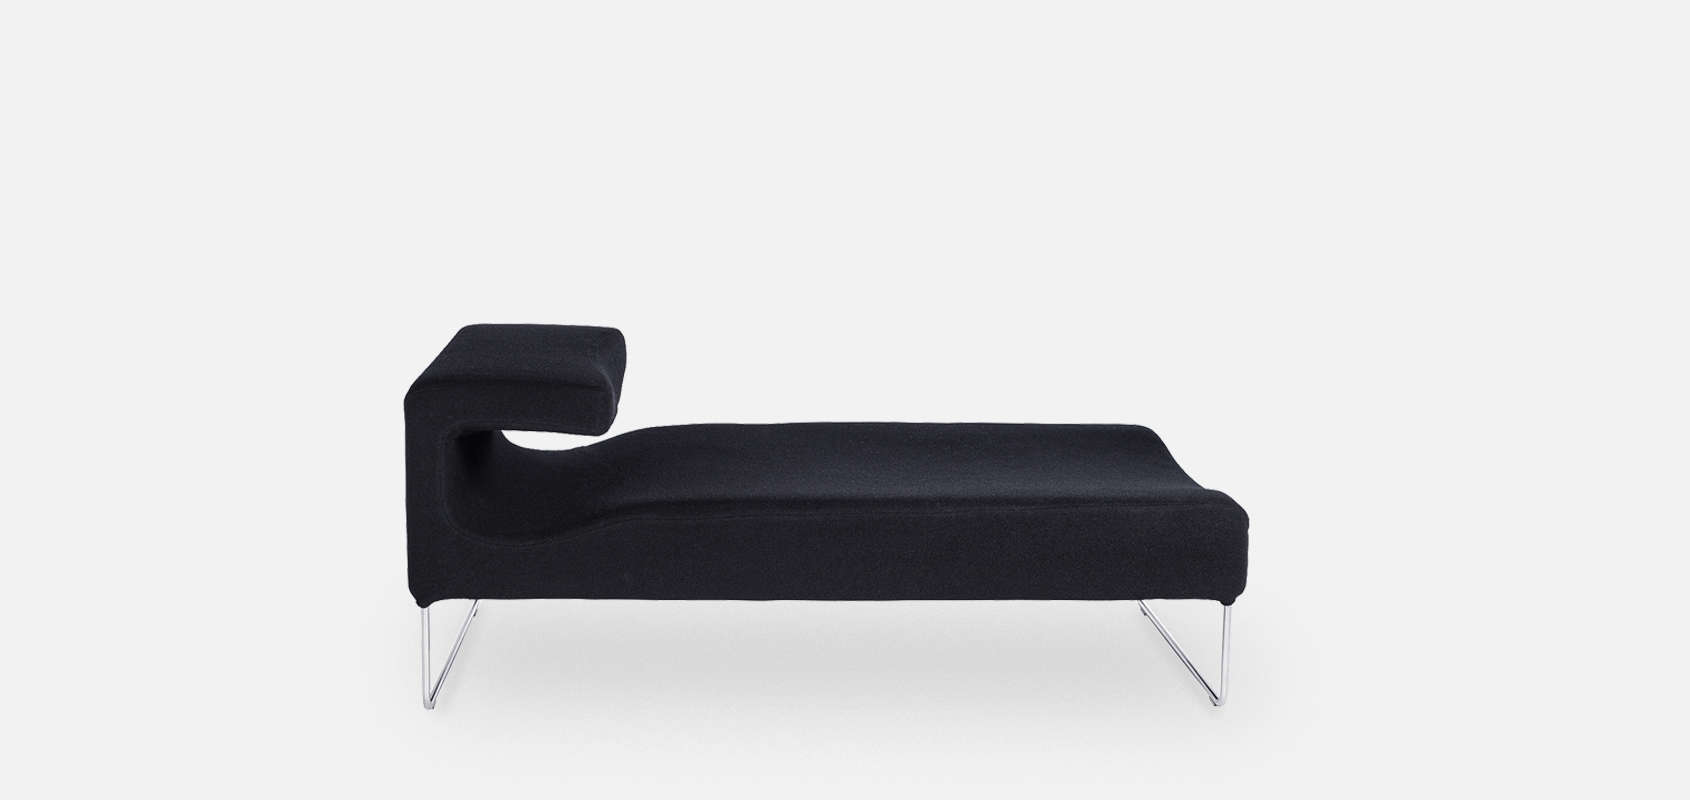 Lowseat Chaise Lounge